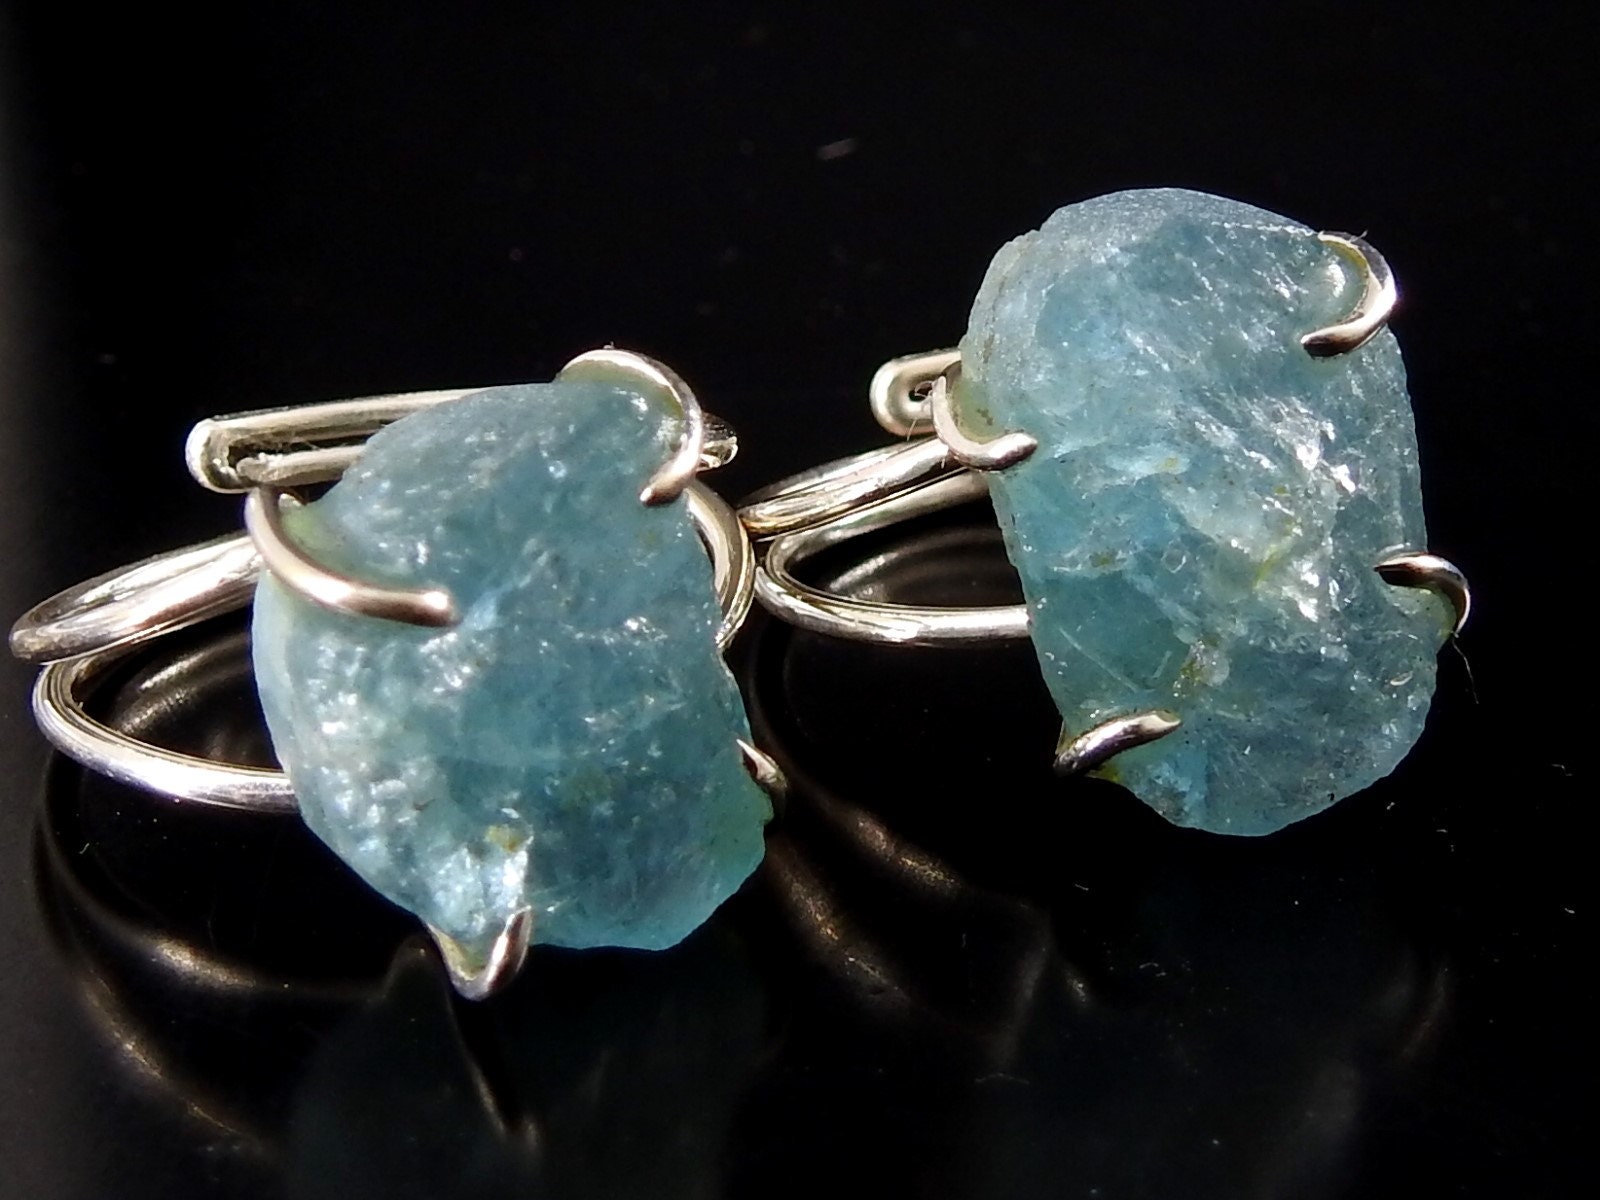 Aquamarine Natural Rough Rings/925 Sterling Silver Jewelry/Adjustable/Loose Raw/Wire-Wrapped/Minerals Stone/One Of A Kind/20-22MM Long/CJ-1 | Save 33% - Rajasthan Living 11